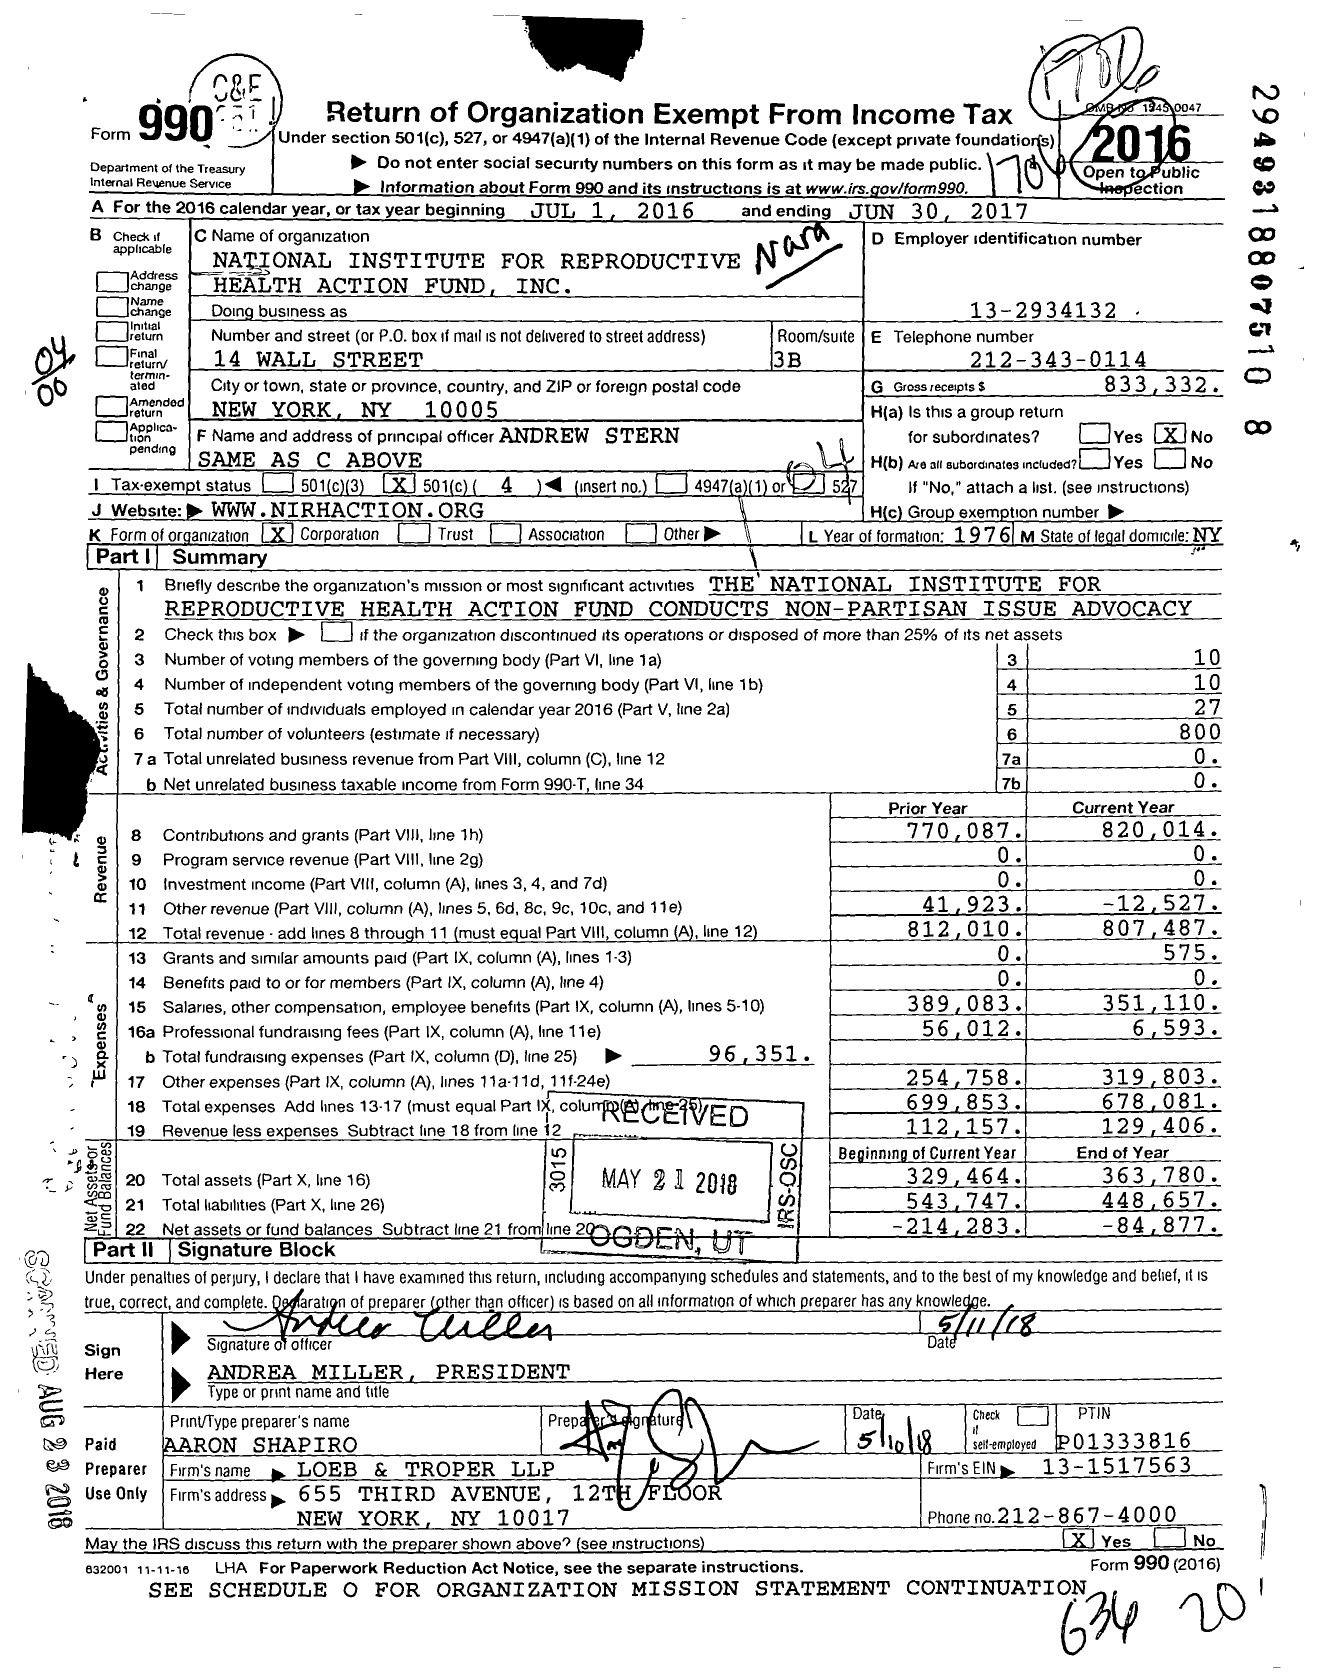 Image of first page of 2016 Form 990O for National Institute for Reproductive Health Action Fund